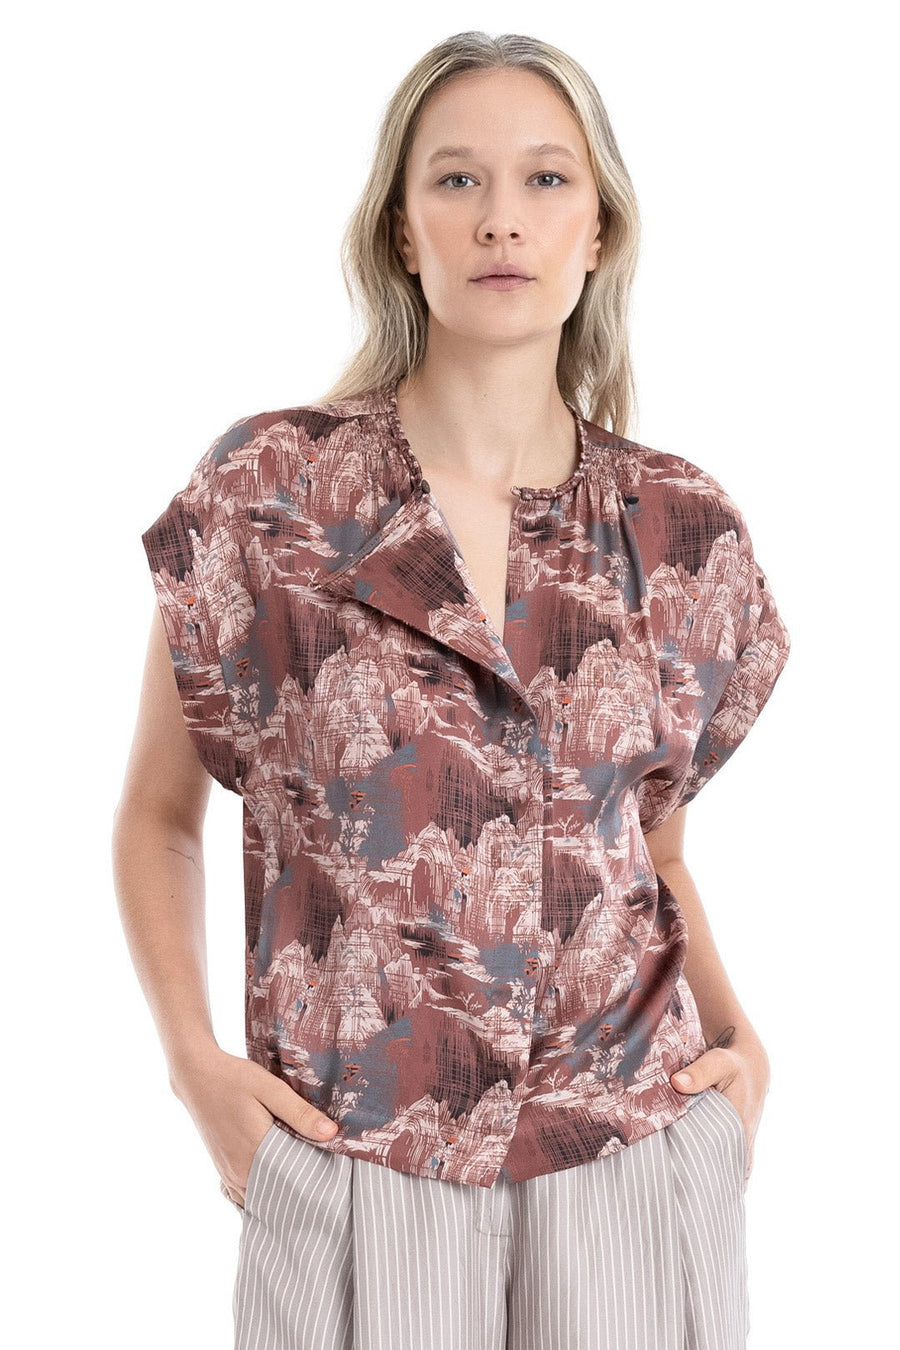 OASIS SHORT SLEEVE TOP, CLAY - Burning Torch Online Boutique